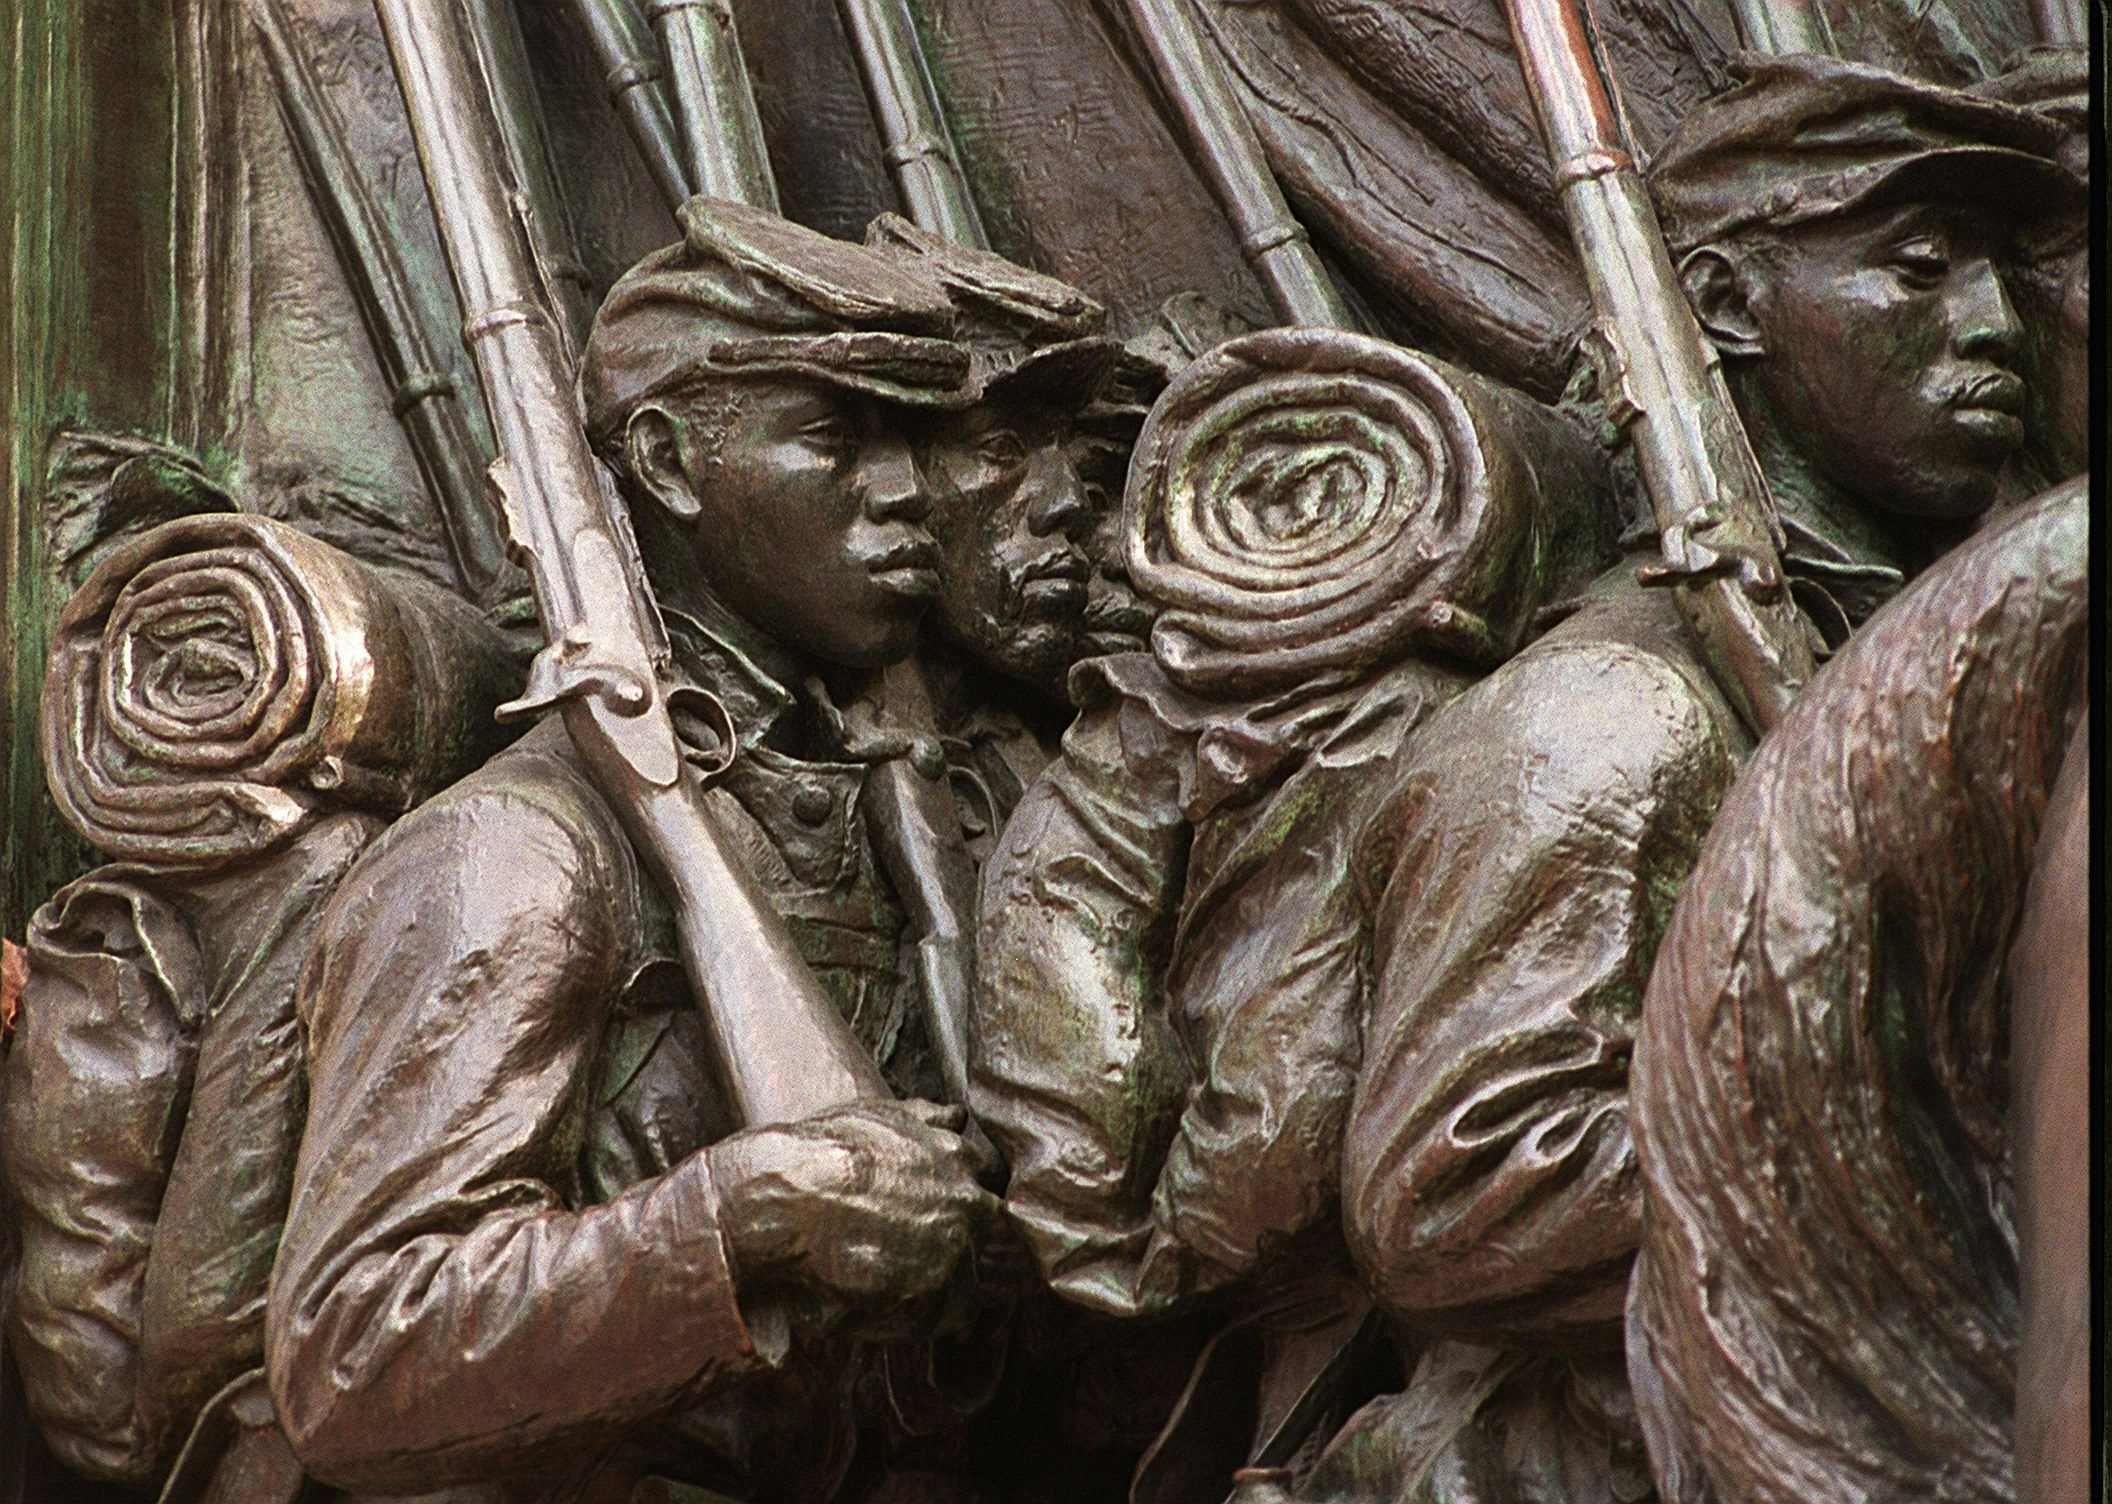 A close up of soldiers faces' on the Memorial To Robert Gould Shaw And 54th Regiment sculpture in Boston